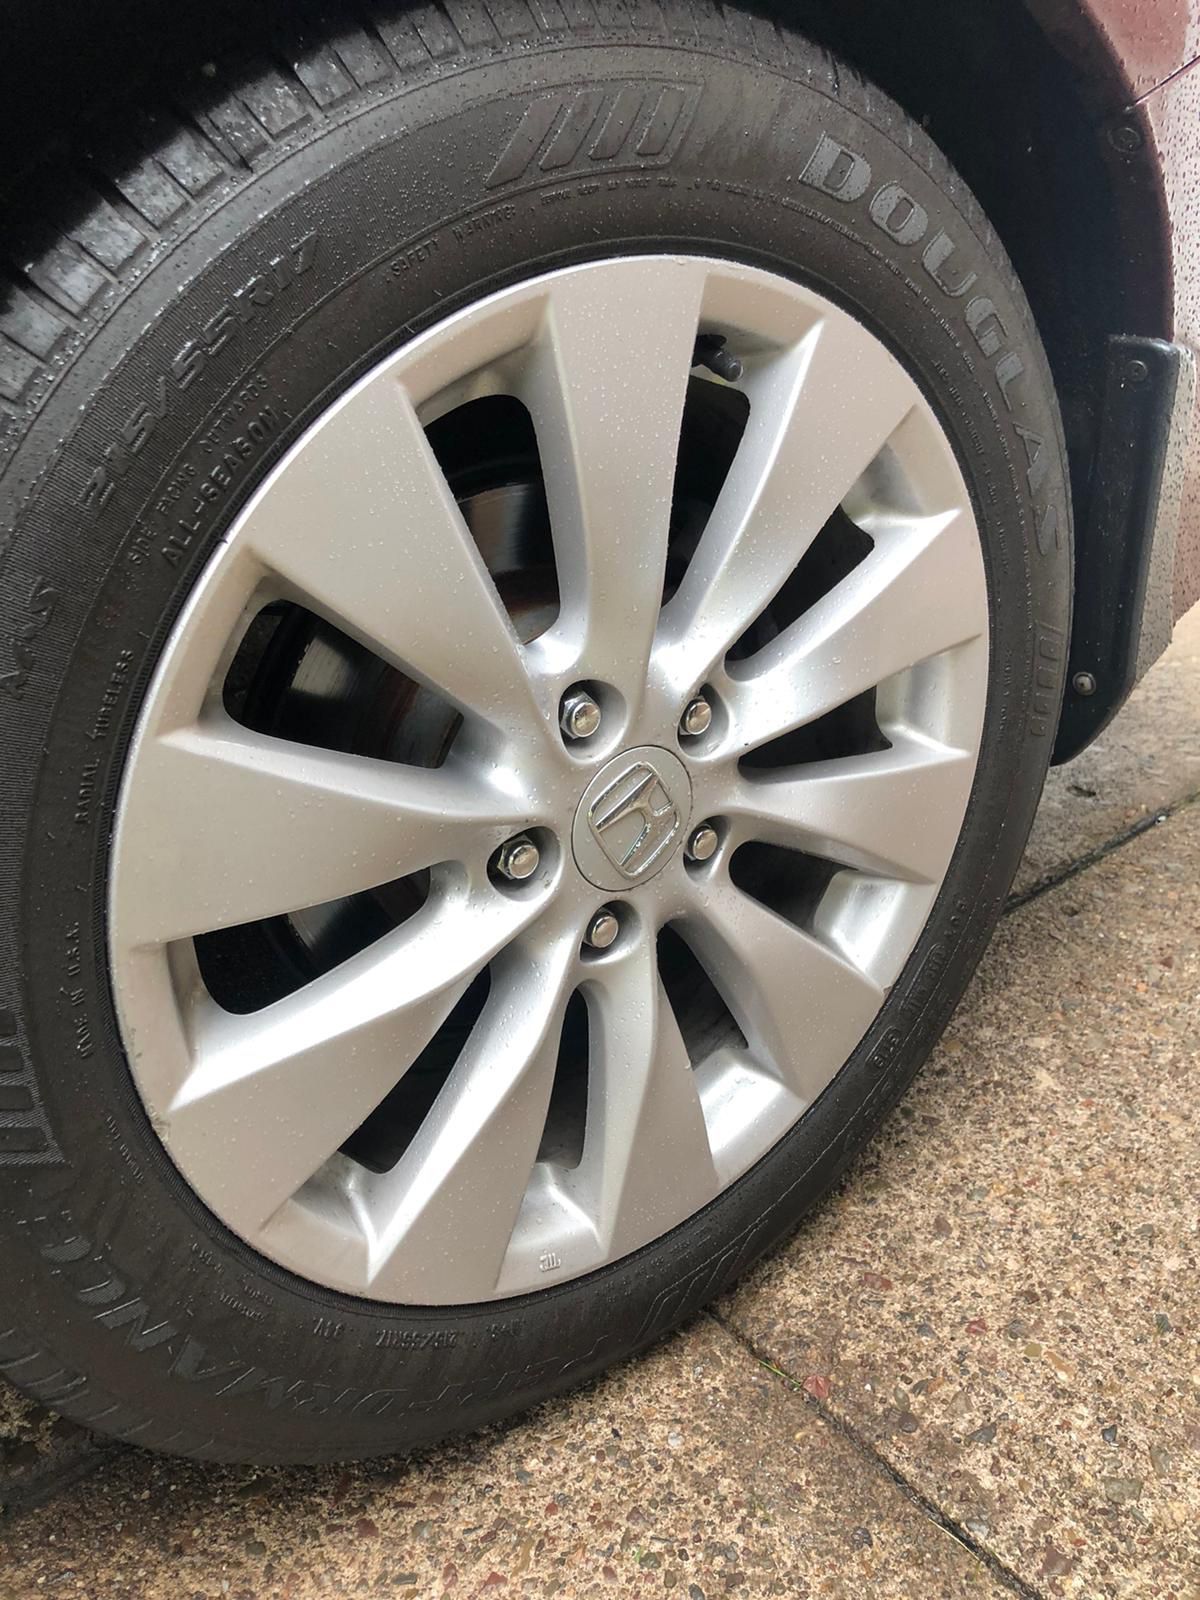 Honda Accord 2013 4 rims with new tires only used 2 months